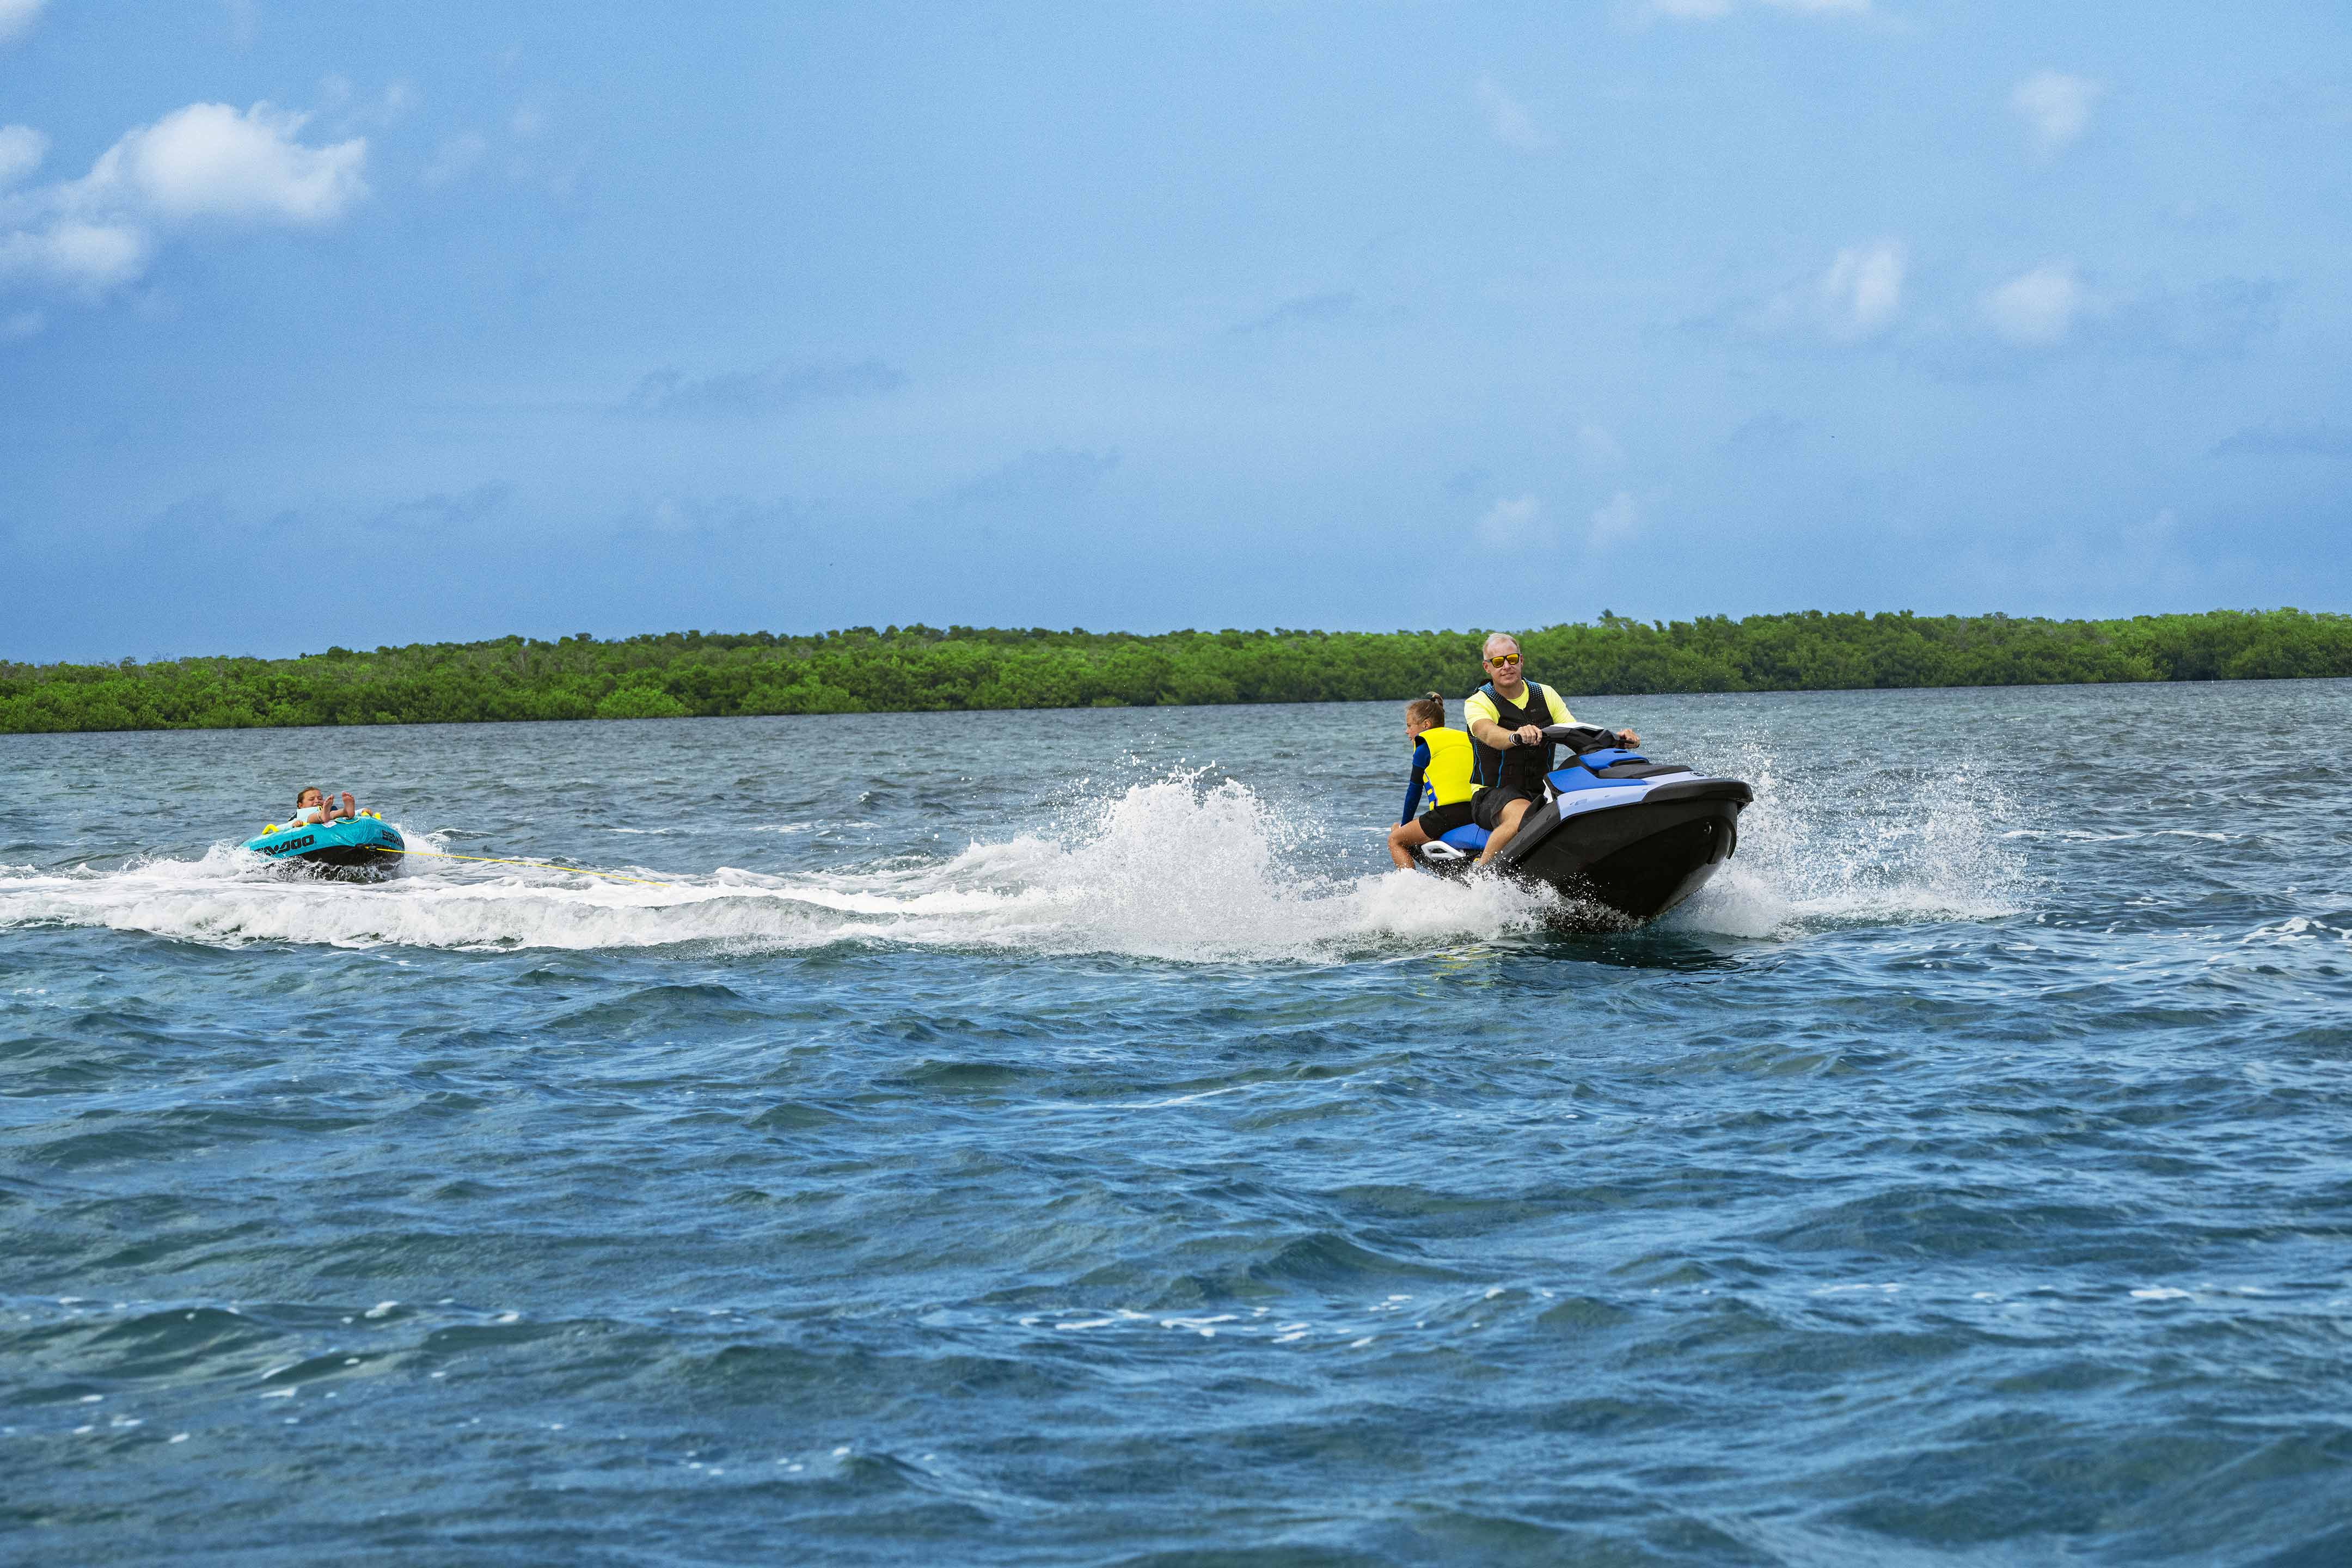 Father and his daughters enjoying a ride on a Sea-Doo Spark personal watercraft